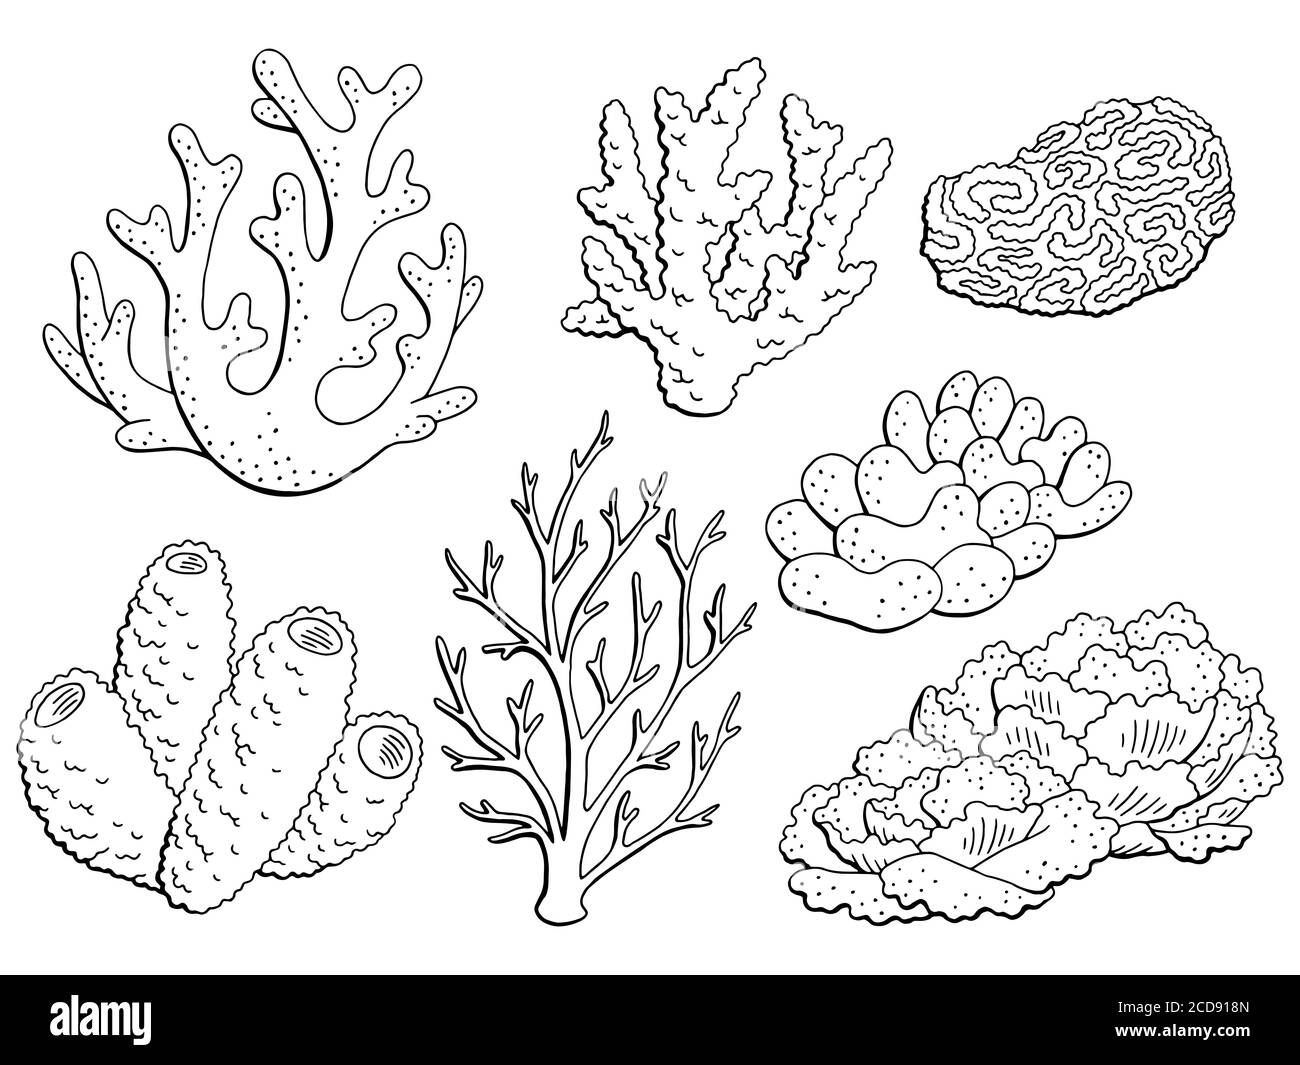 Coral set graphic black white isolated sketch illustration vector Stock Vector